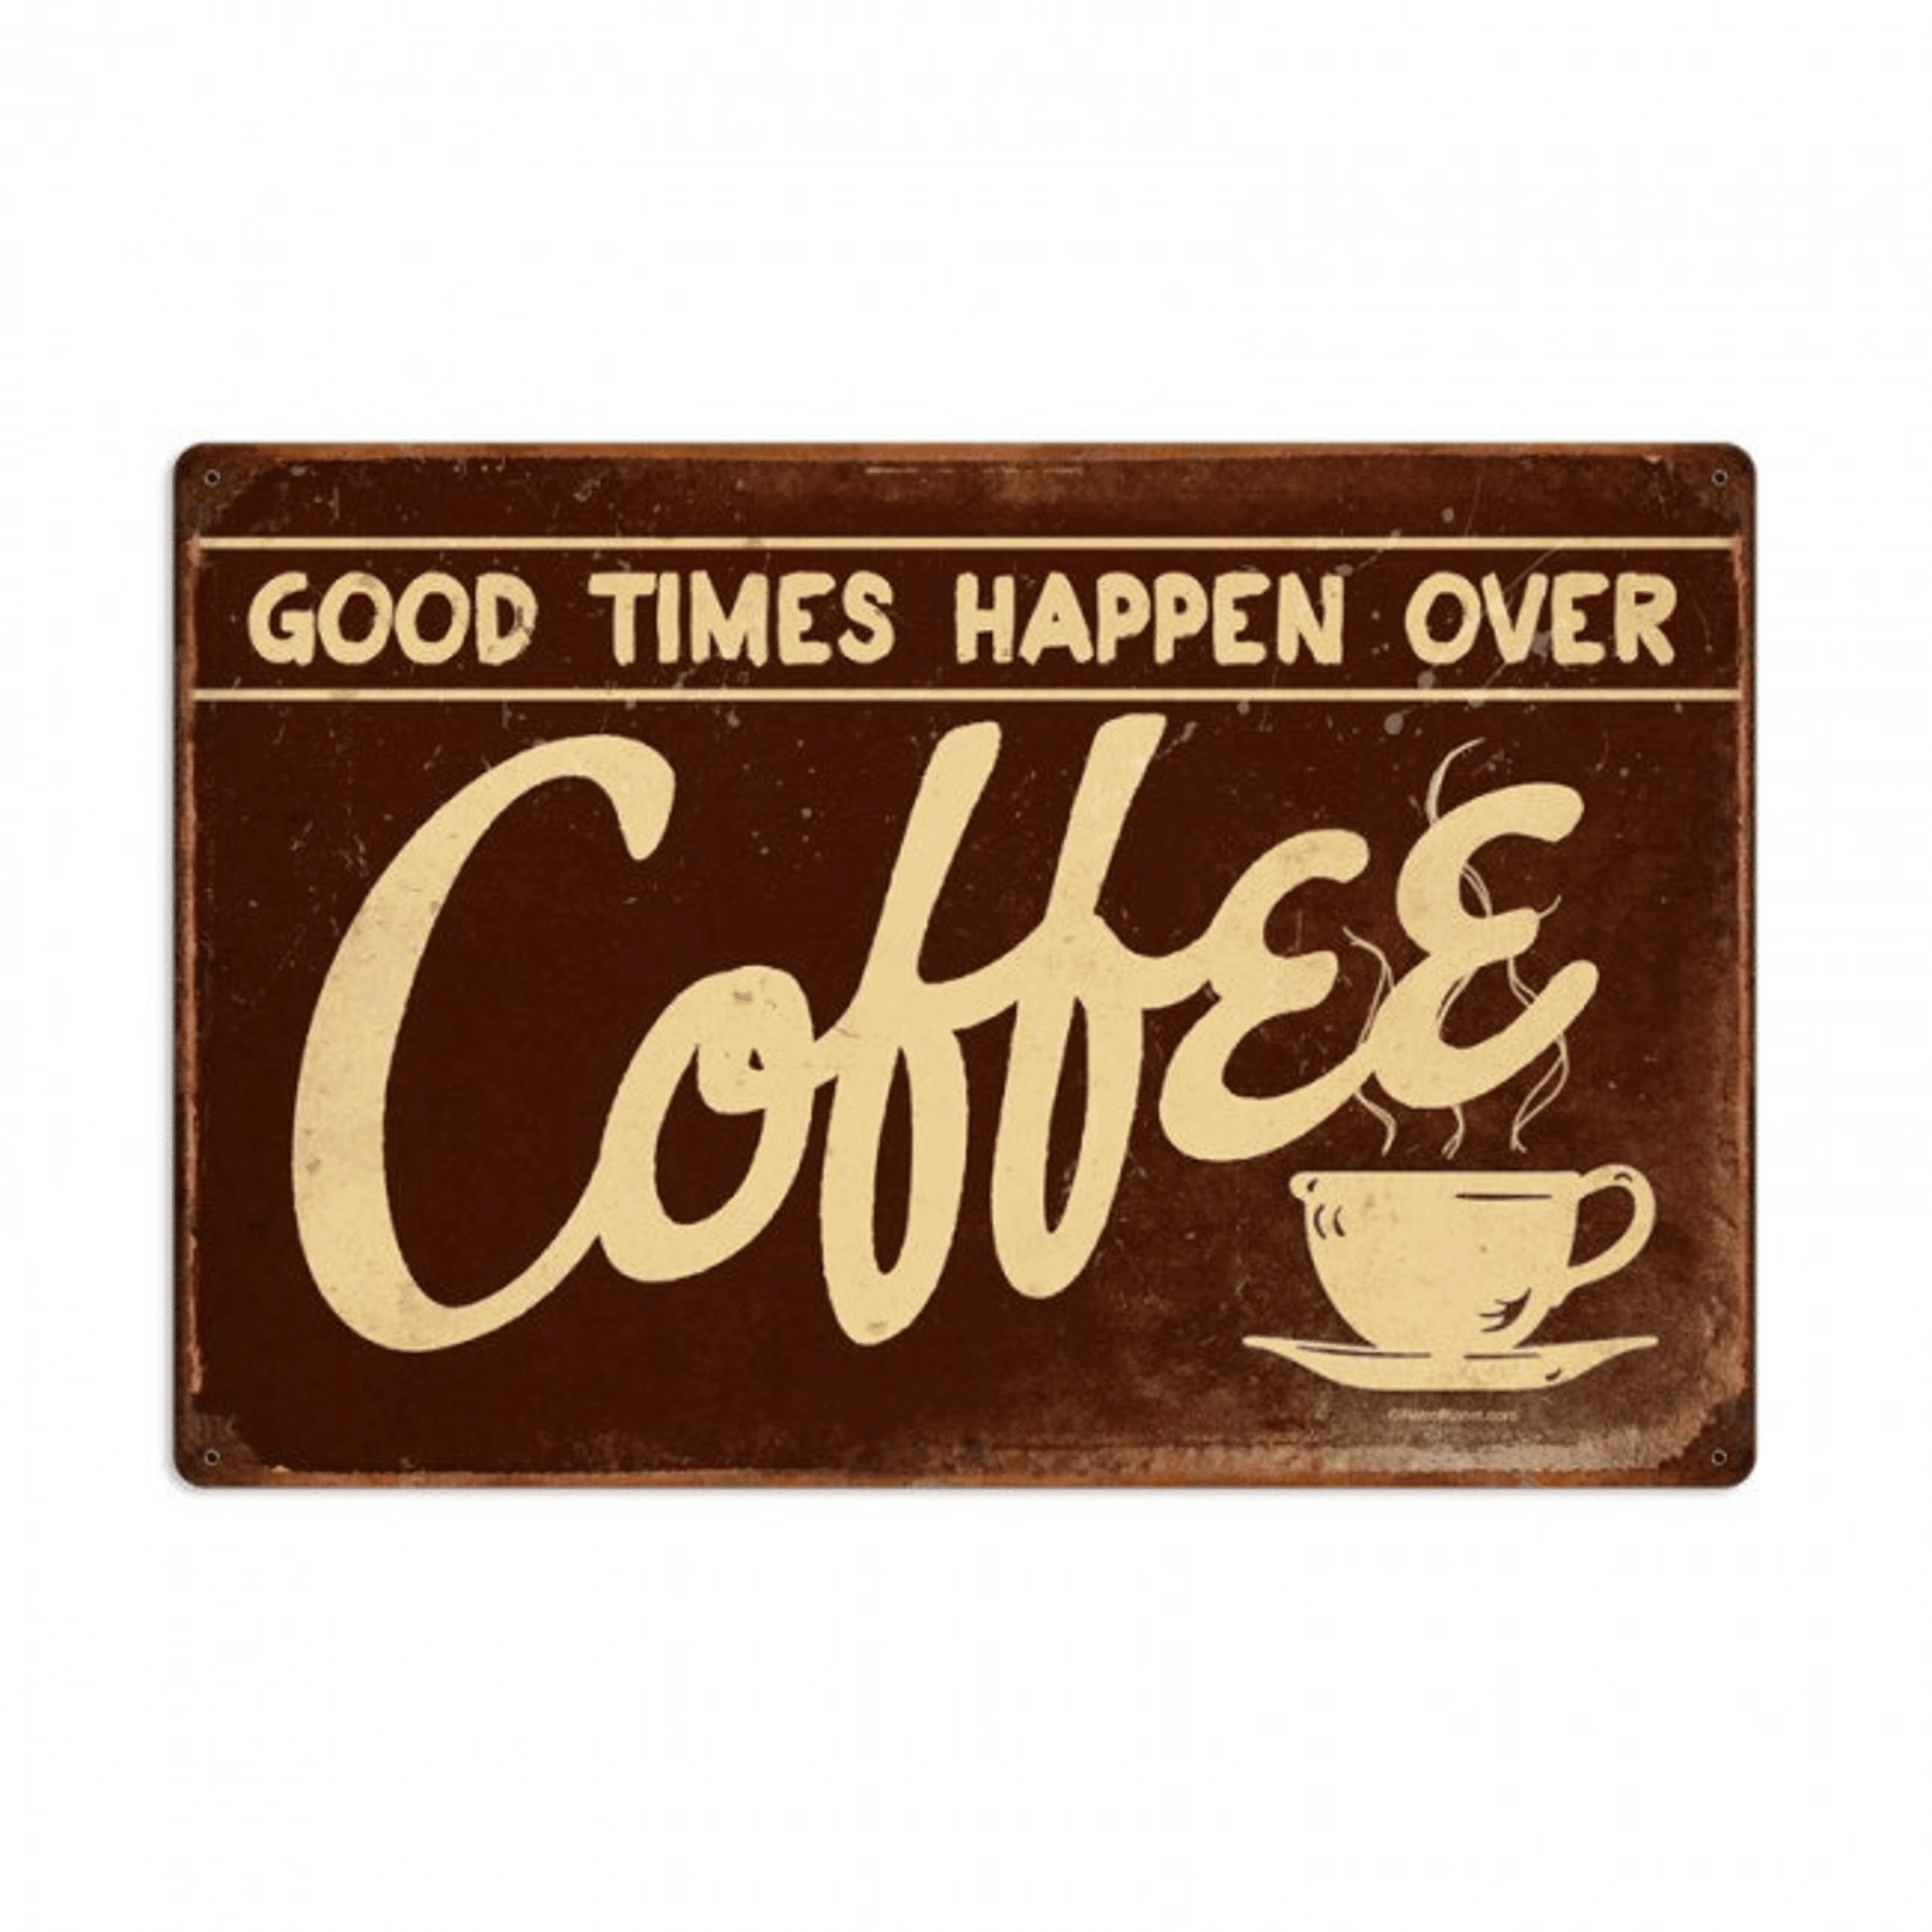 Coffee Retro Planet advertising metal sign vintage style home decor wall art